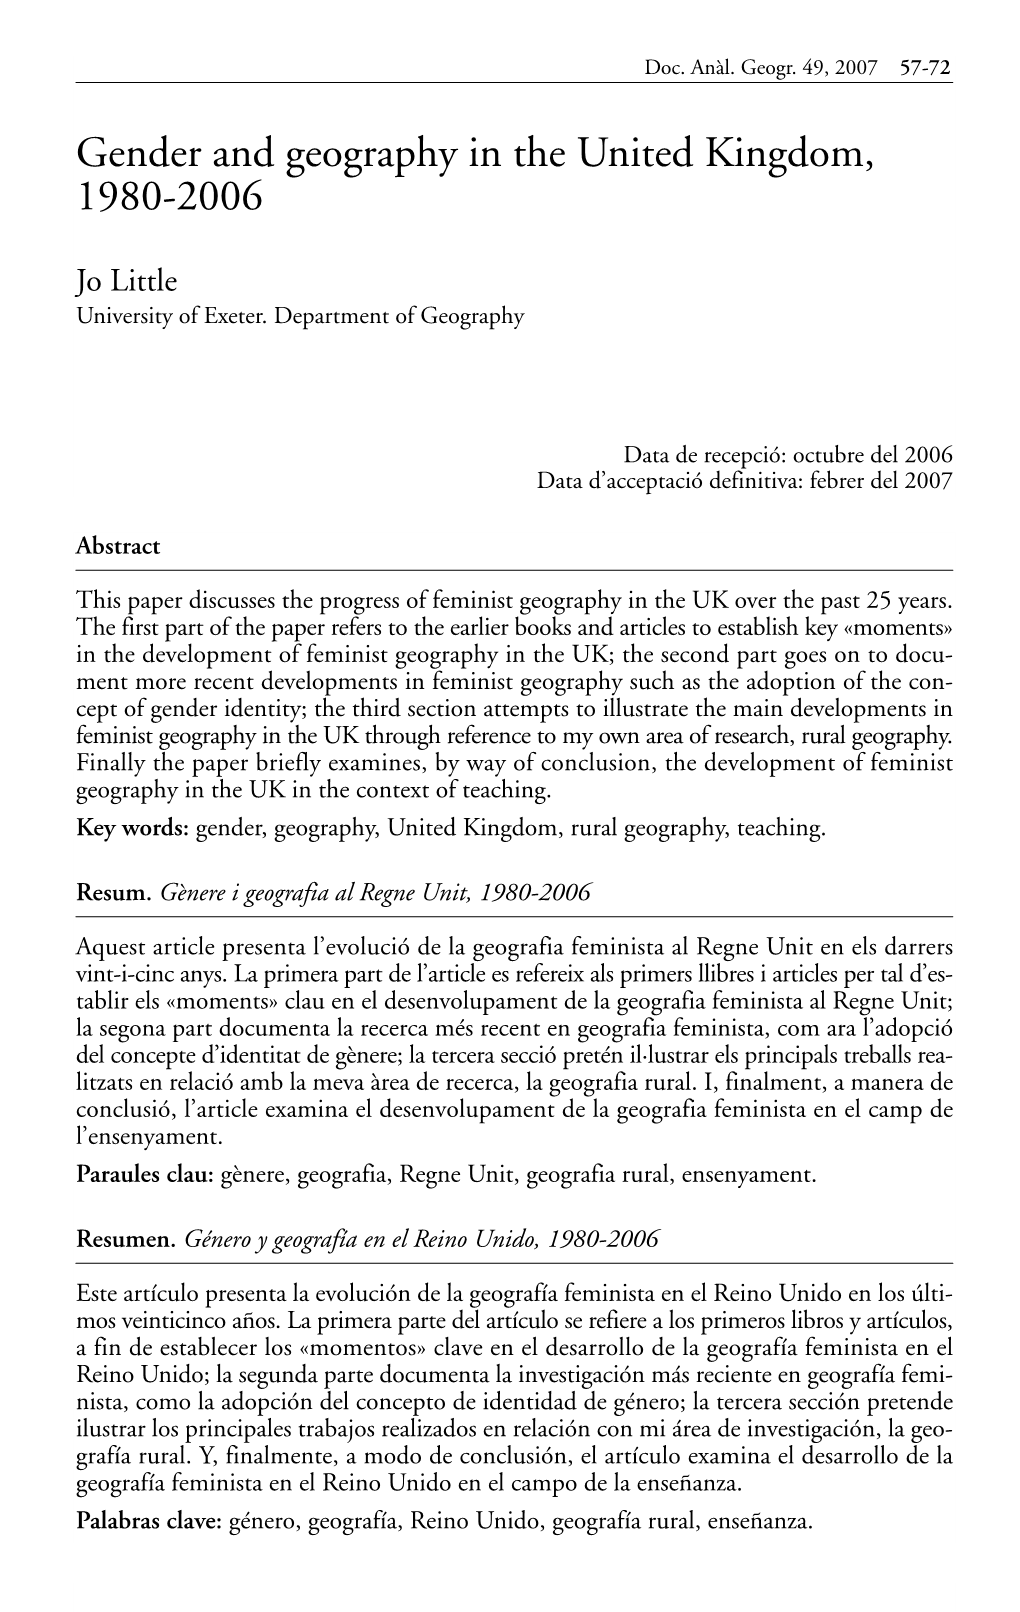 Gender and Geography in the United Kingdom, 1980-2006. Documents